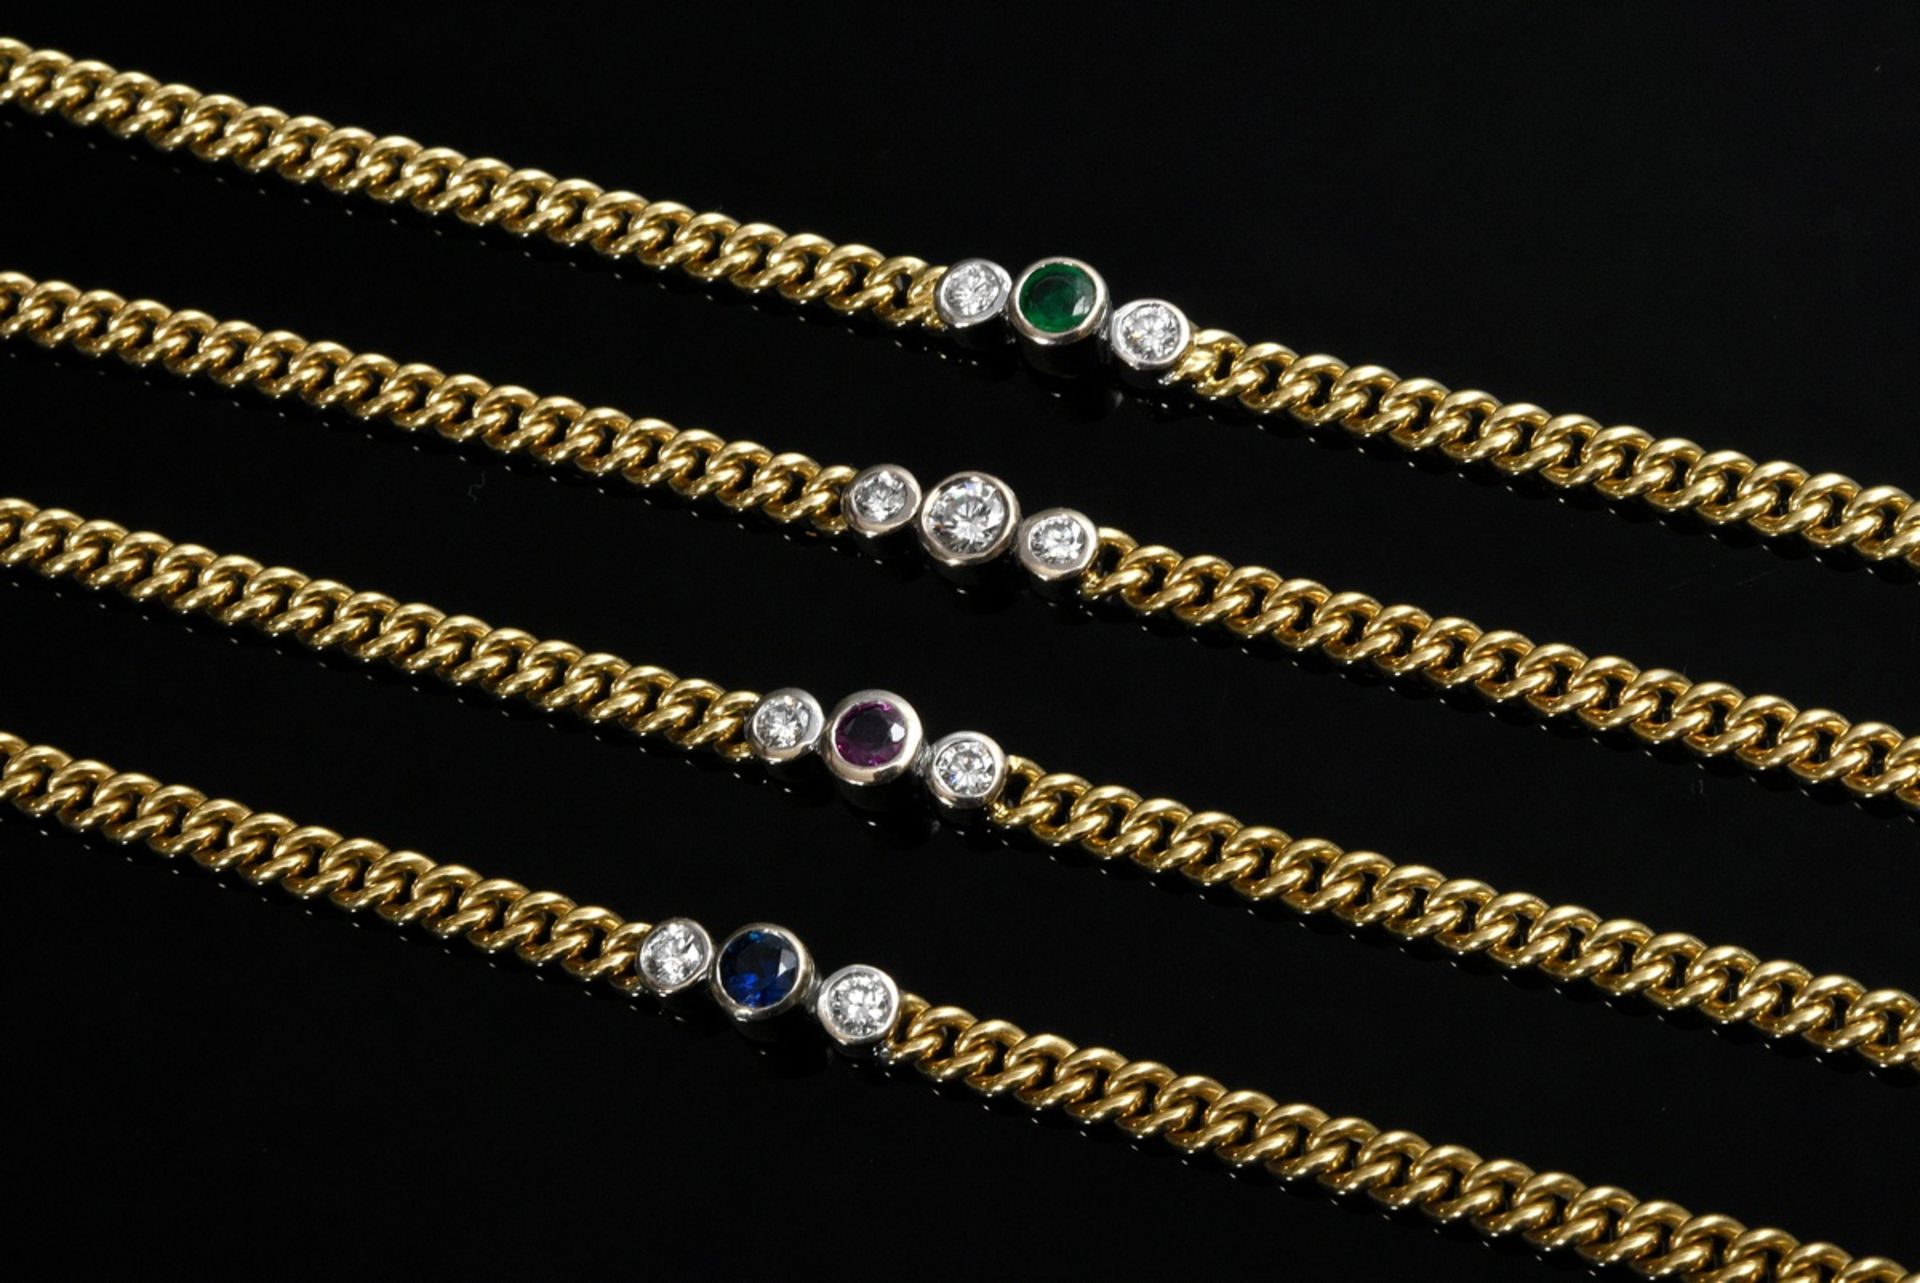 4 yellow gold 750 round bracelets with emerald, ruby, sapphire (each 0.15ct) and 9 brilliants (toge - Image 2 of 2